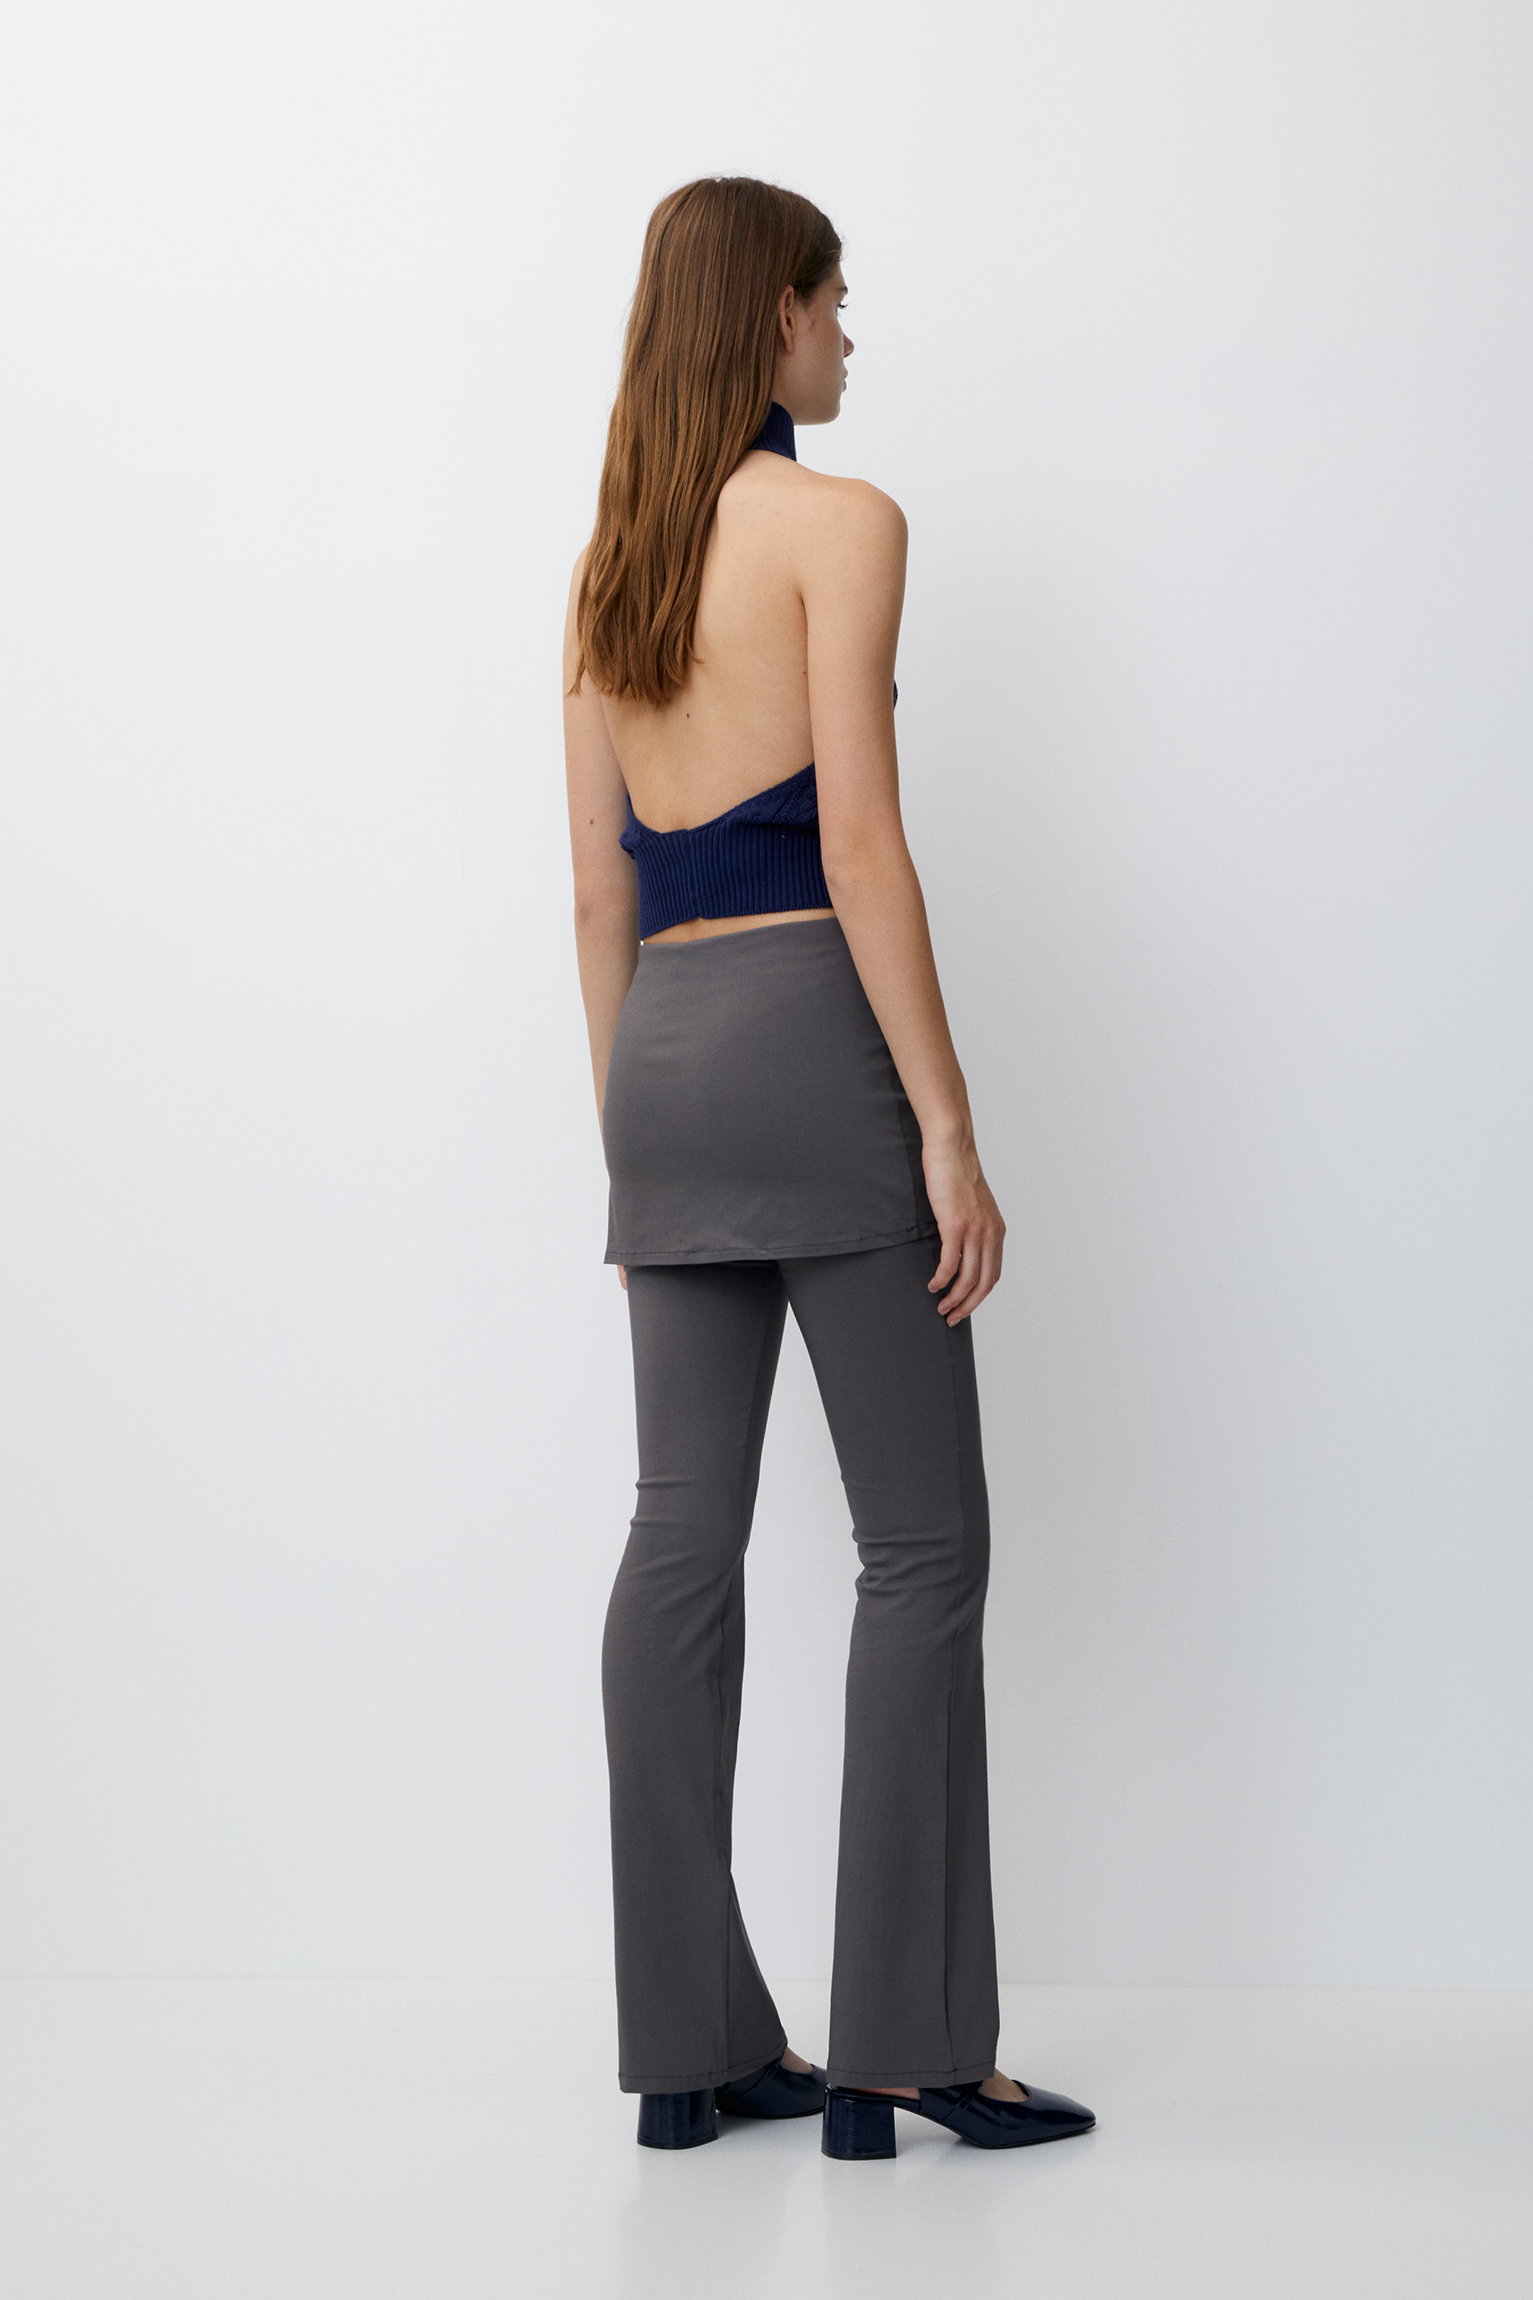 Pull&Bear skirt detail flare pants in charcoal grey